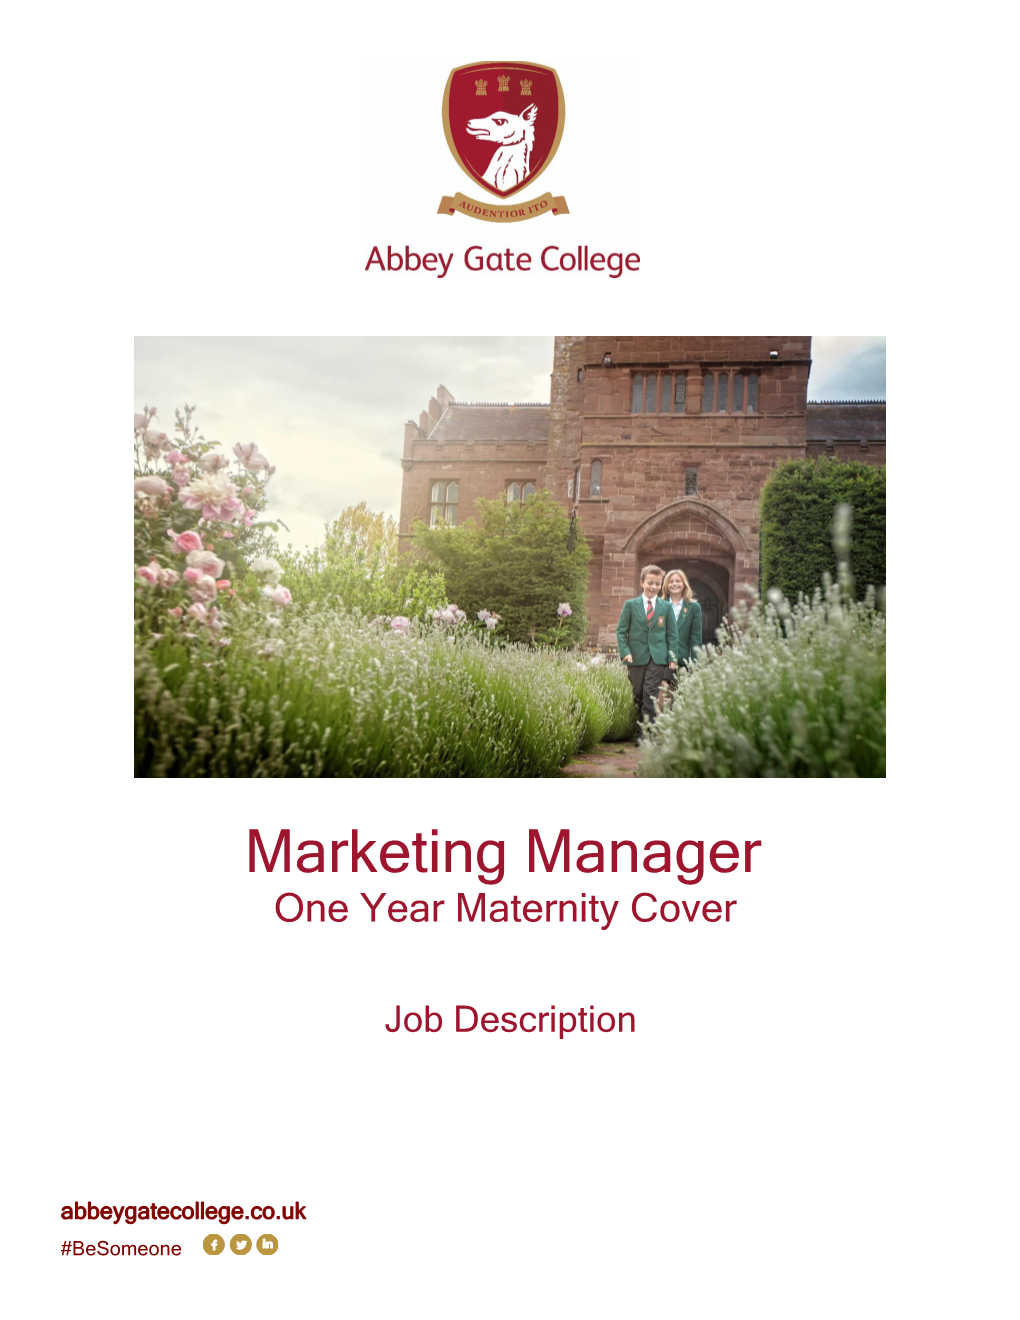 One Year Maternity Cover